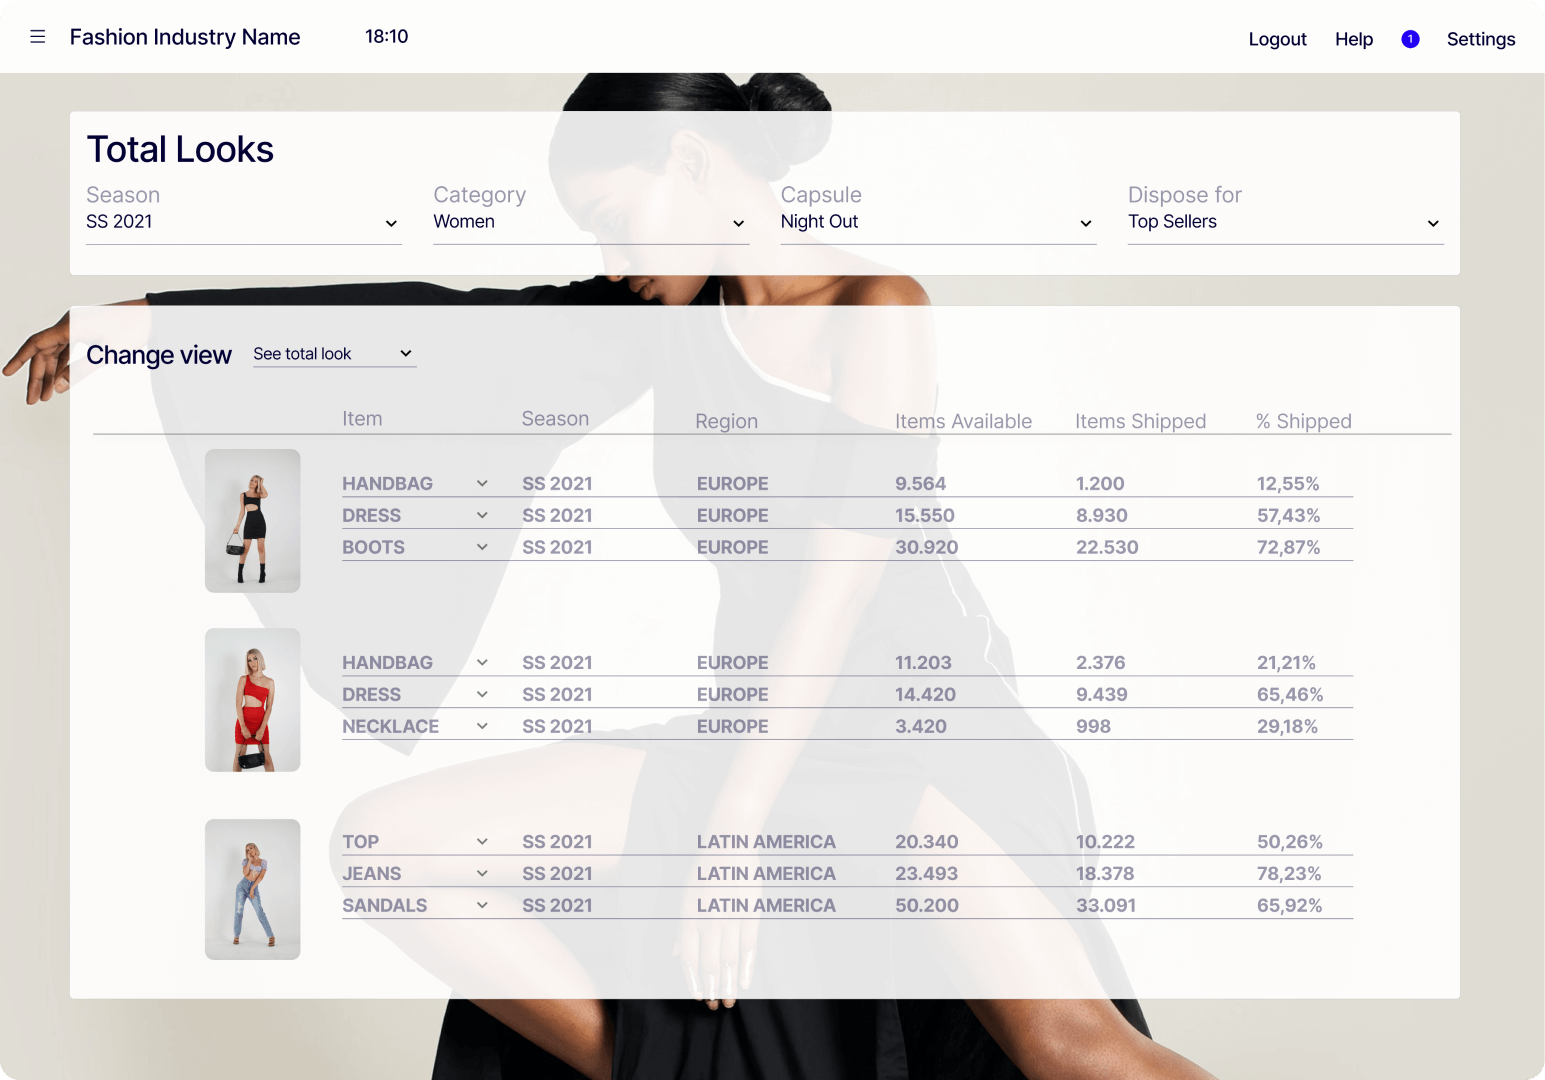 A screenshot of the Fashion Industry Software.